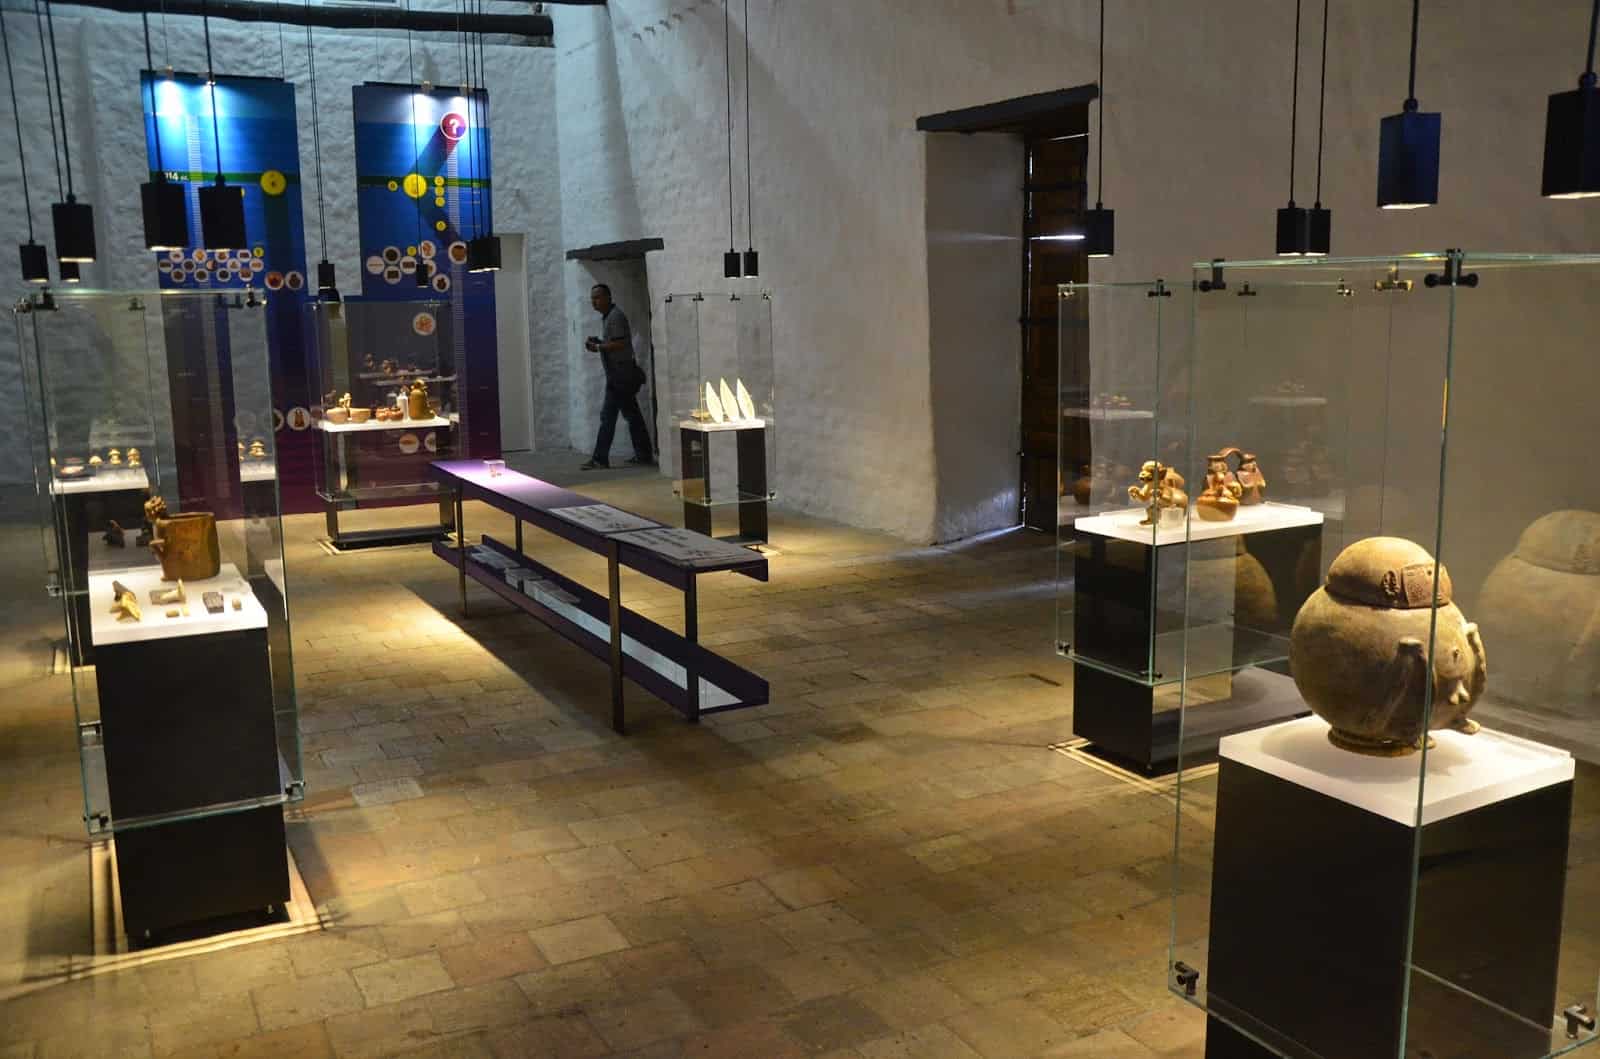 La Merced Archaeological Museum in Cali, Colombia